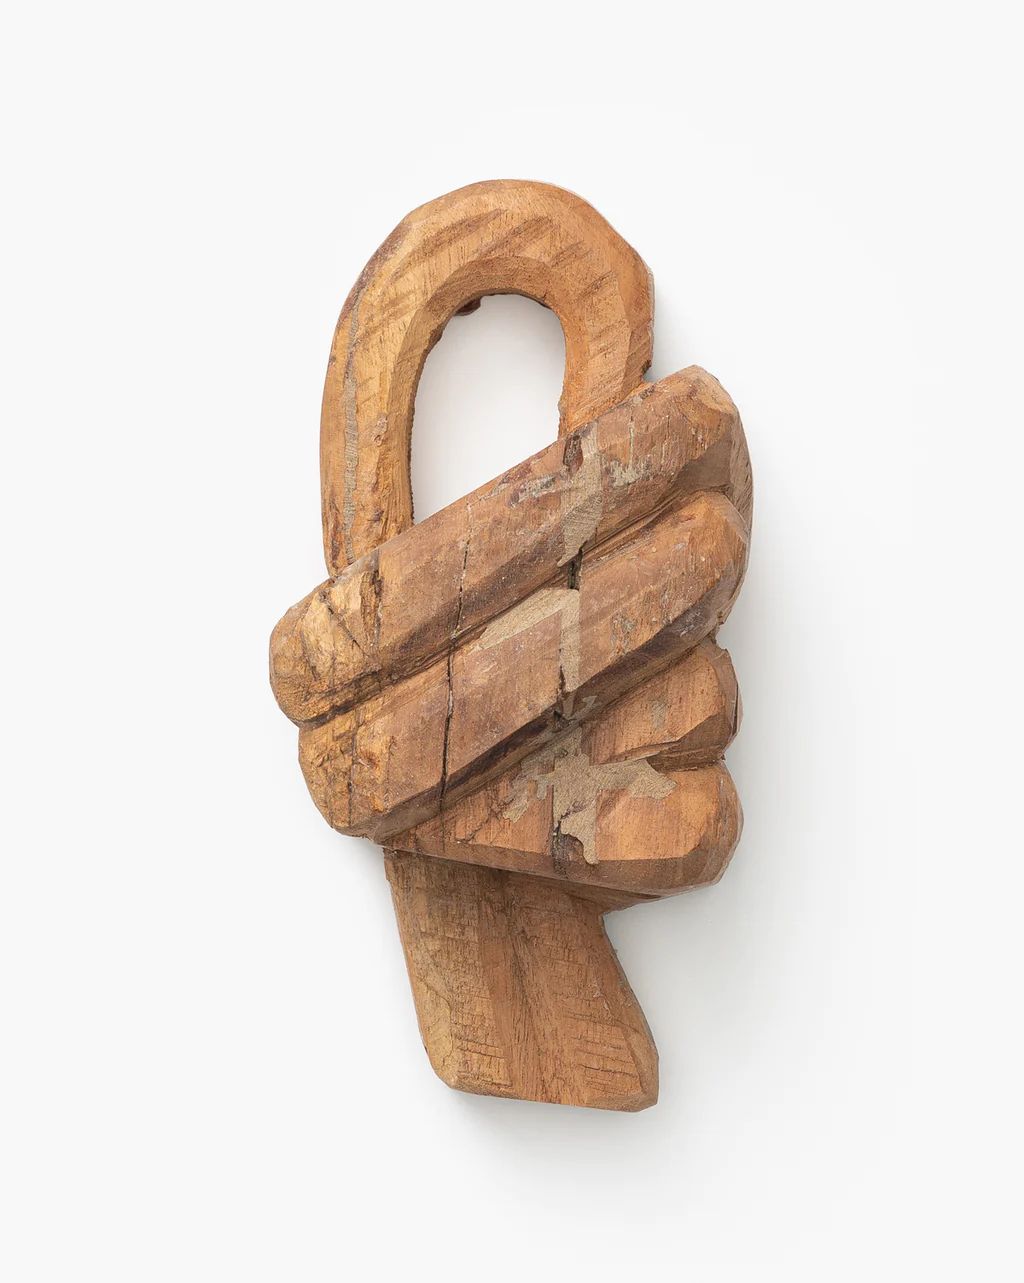 Reclaimed Wooden Knot | McGee & Co.